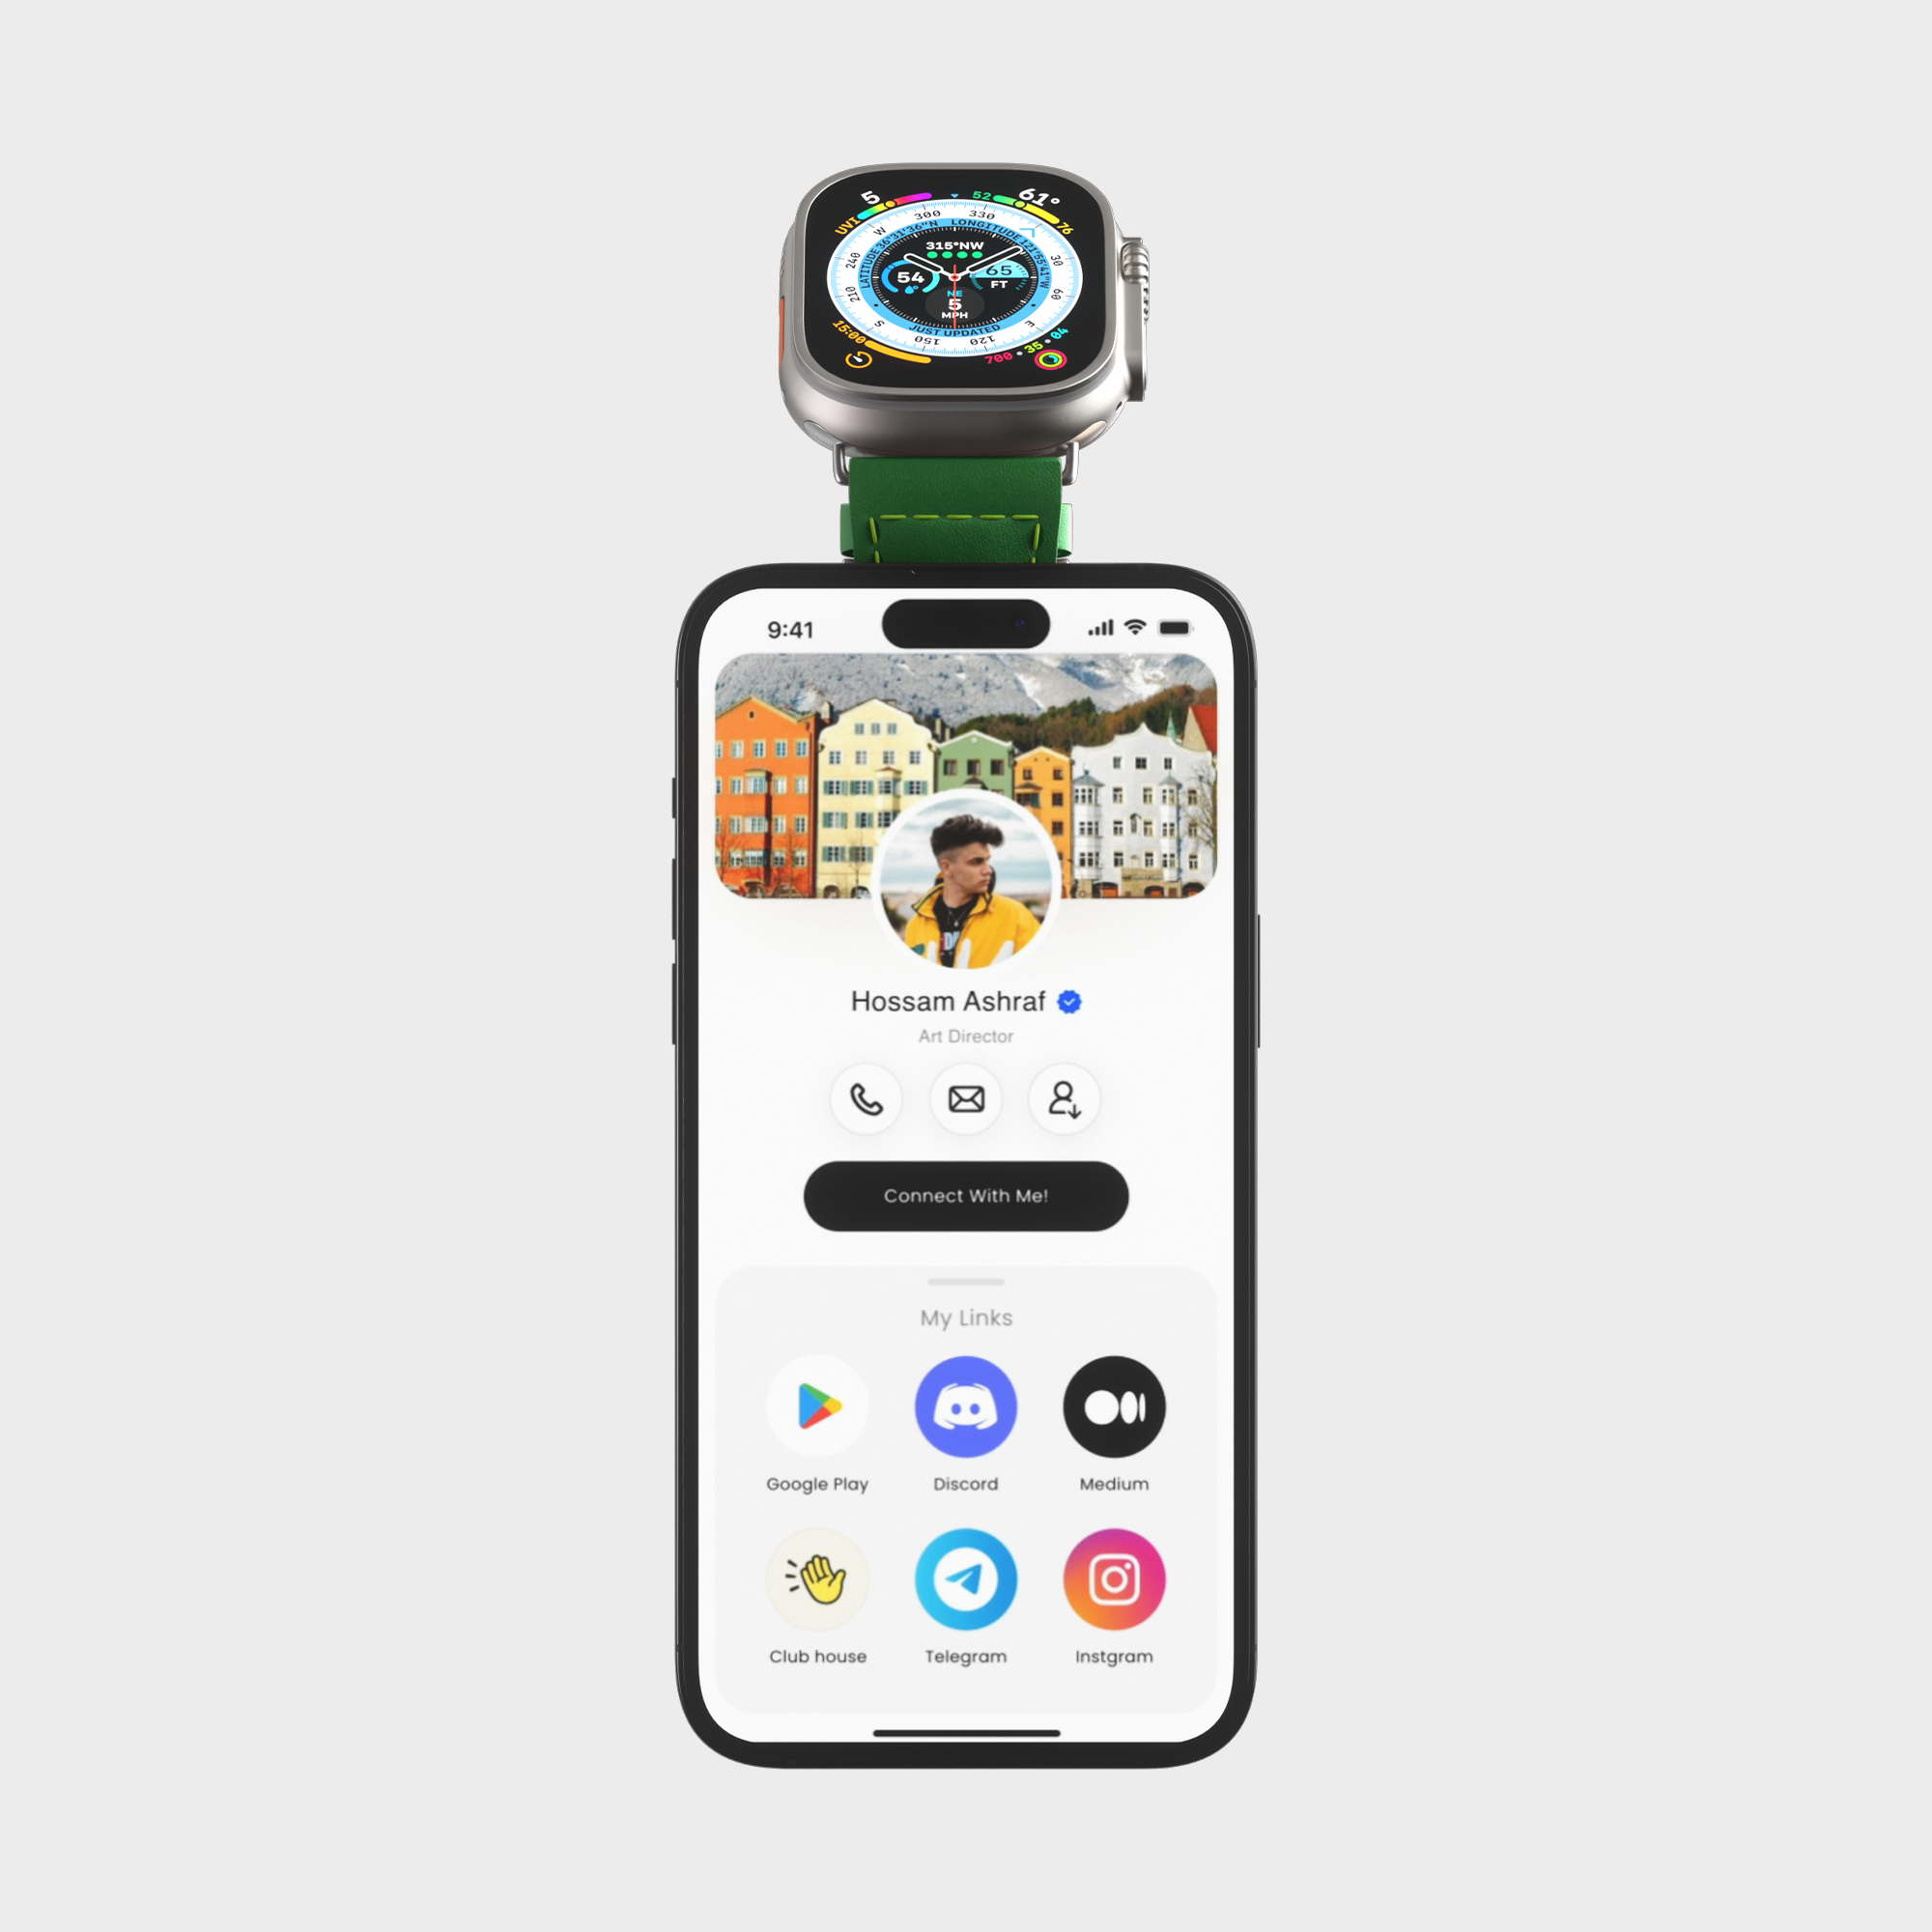 Smartwatch on top of smartphone showcasing social media profile and app icons.